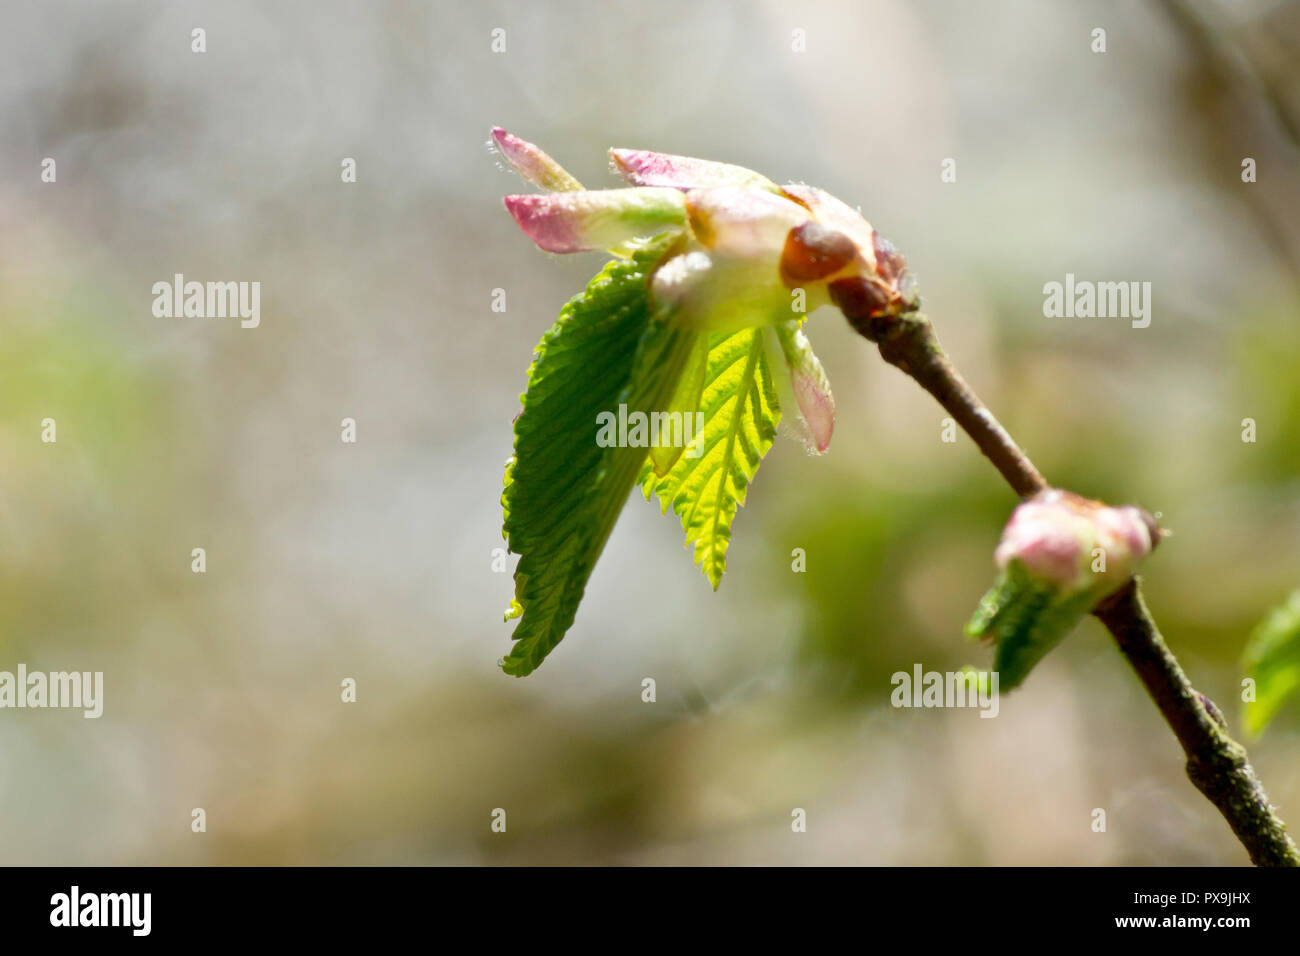 Wych Elm (ulmus glabra), close up of the back-lit leaves emerging from their buds in the spring. Stock Photo